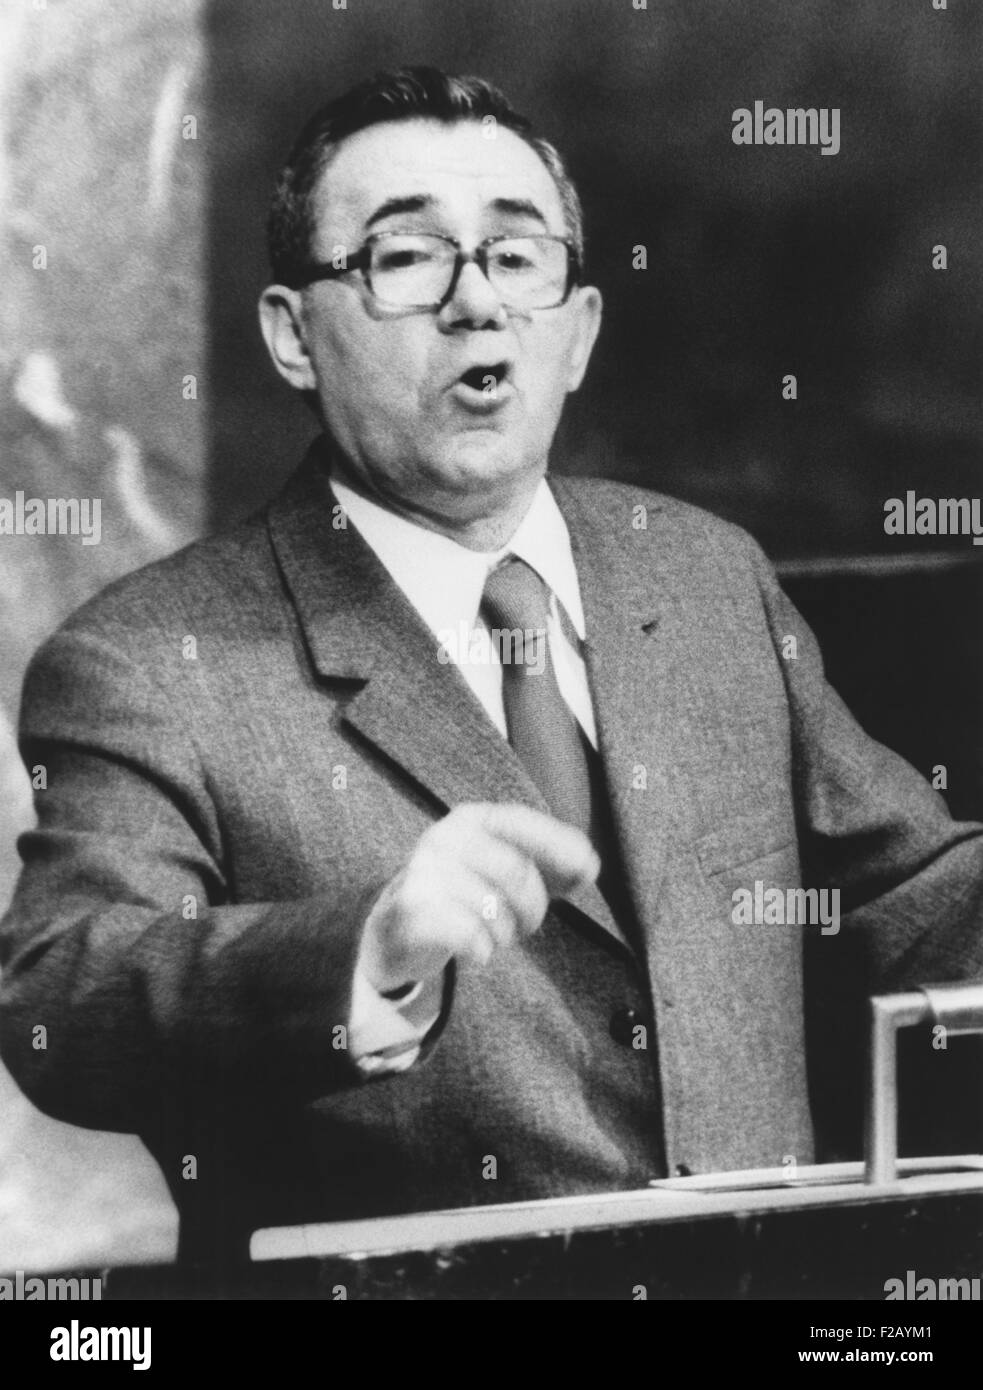 Andrei Gromyko addressing a United Nations session on raw materials in developing countries. May 1974. The Soviet Foreign Minister denounced western oil companies for their 'plundering the natural resources of the petroleum producing countries. (CSU 2015 9 759) Stock Photo